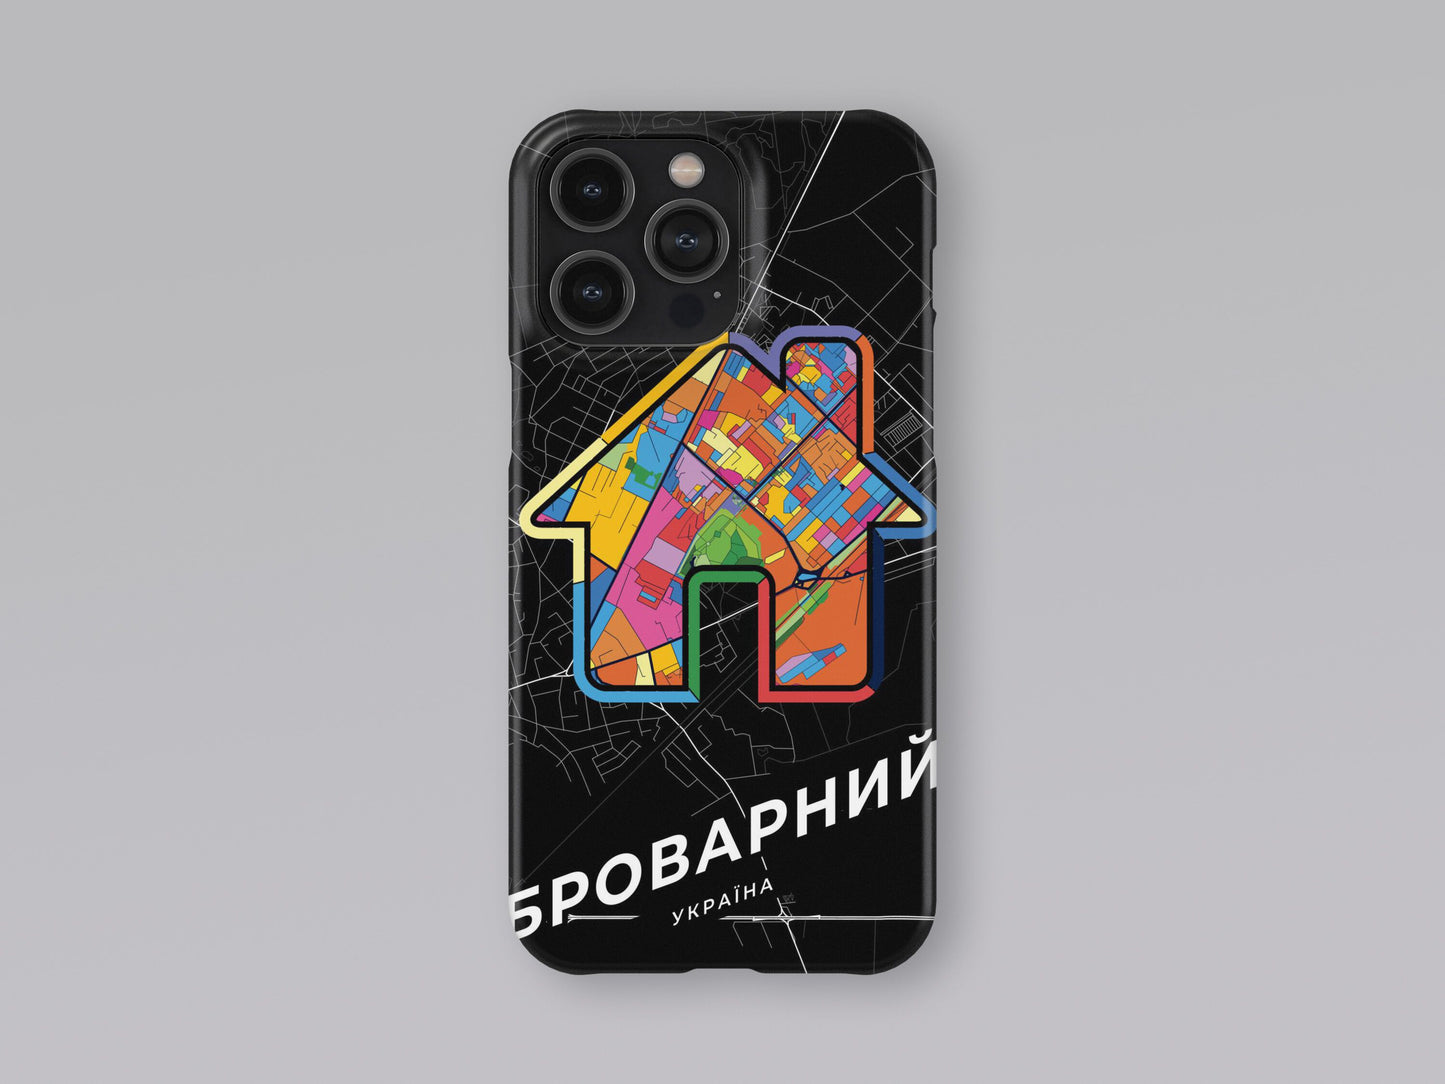 Brovary Ukraine slim phone case with colorful icon. Birthday, wedding or housewarming gift. Couple match cases. 3